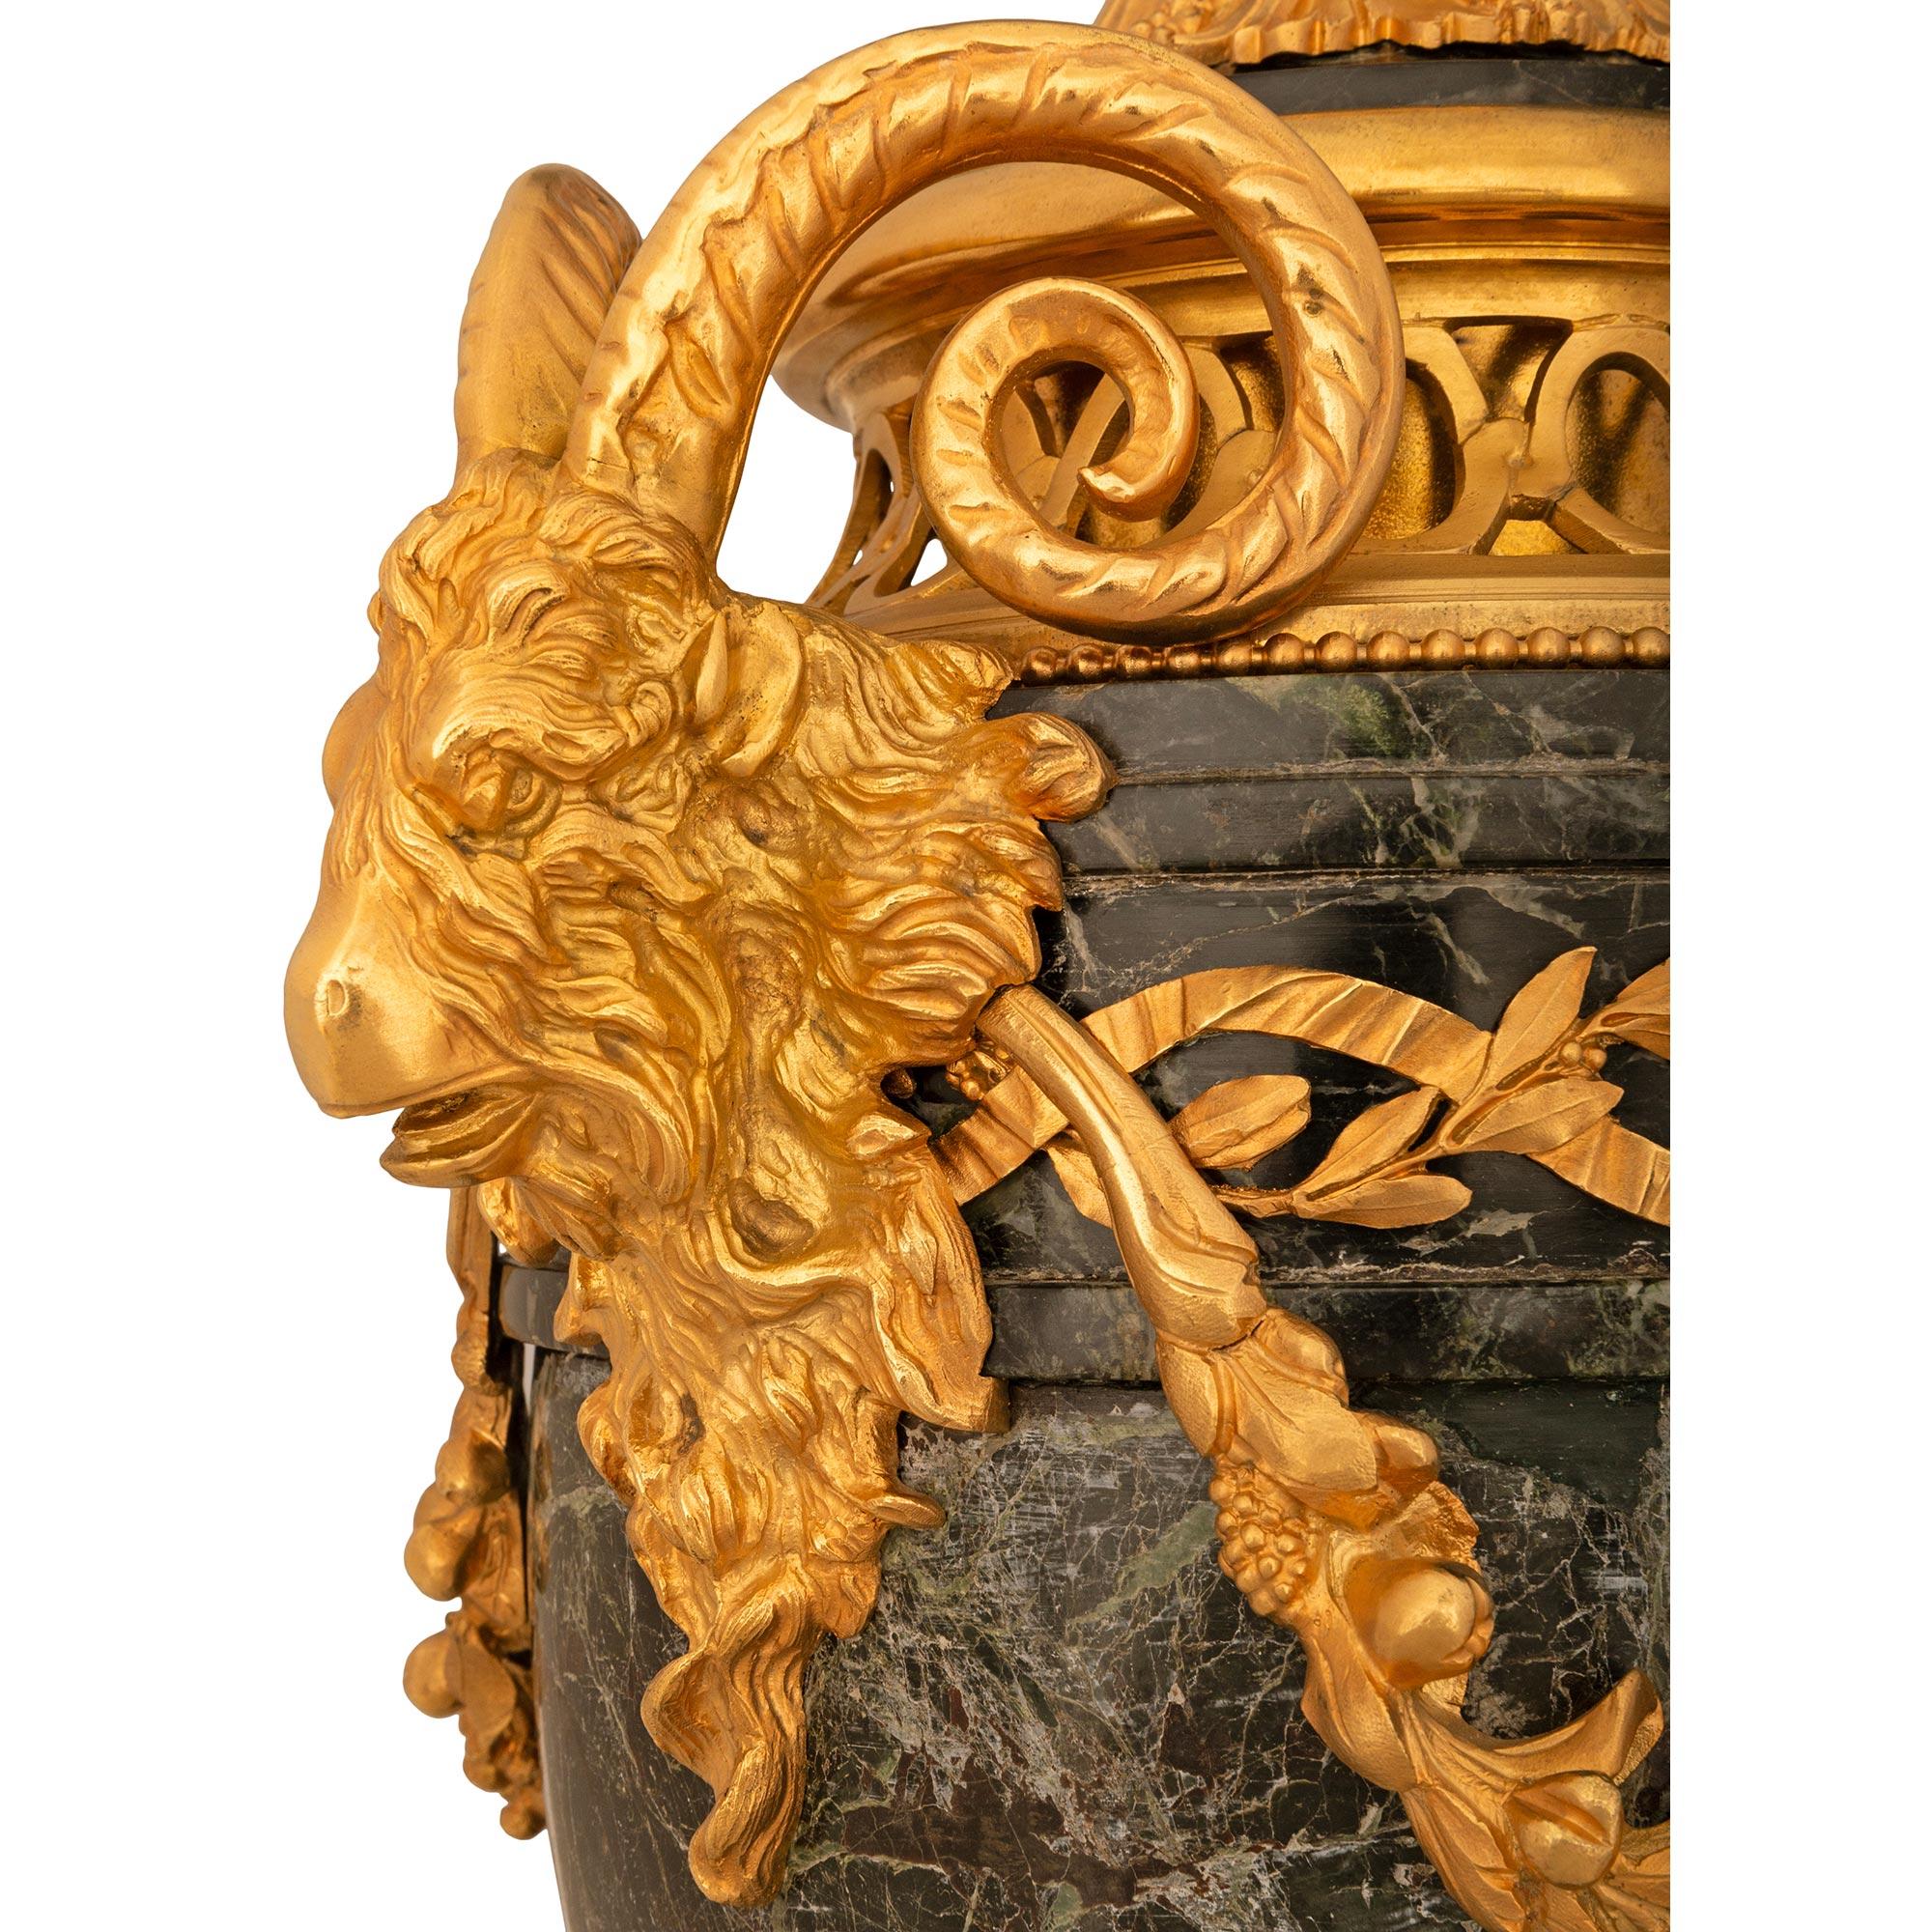 A stunning French 19th century Louis XVI st. Vert de Patricia marble and Ormolu lidded urn. The urn is raised by a square Vert de Patricia marble base with and Ormolu trim. The socle pedestal is decorated with an Ormolu tied wreath and reeded top